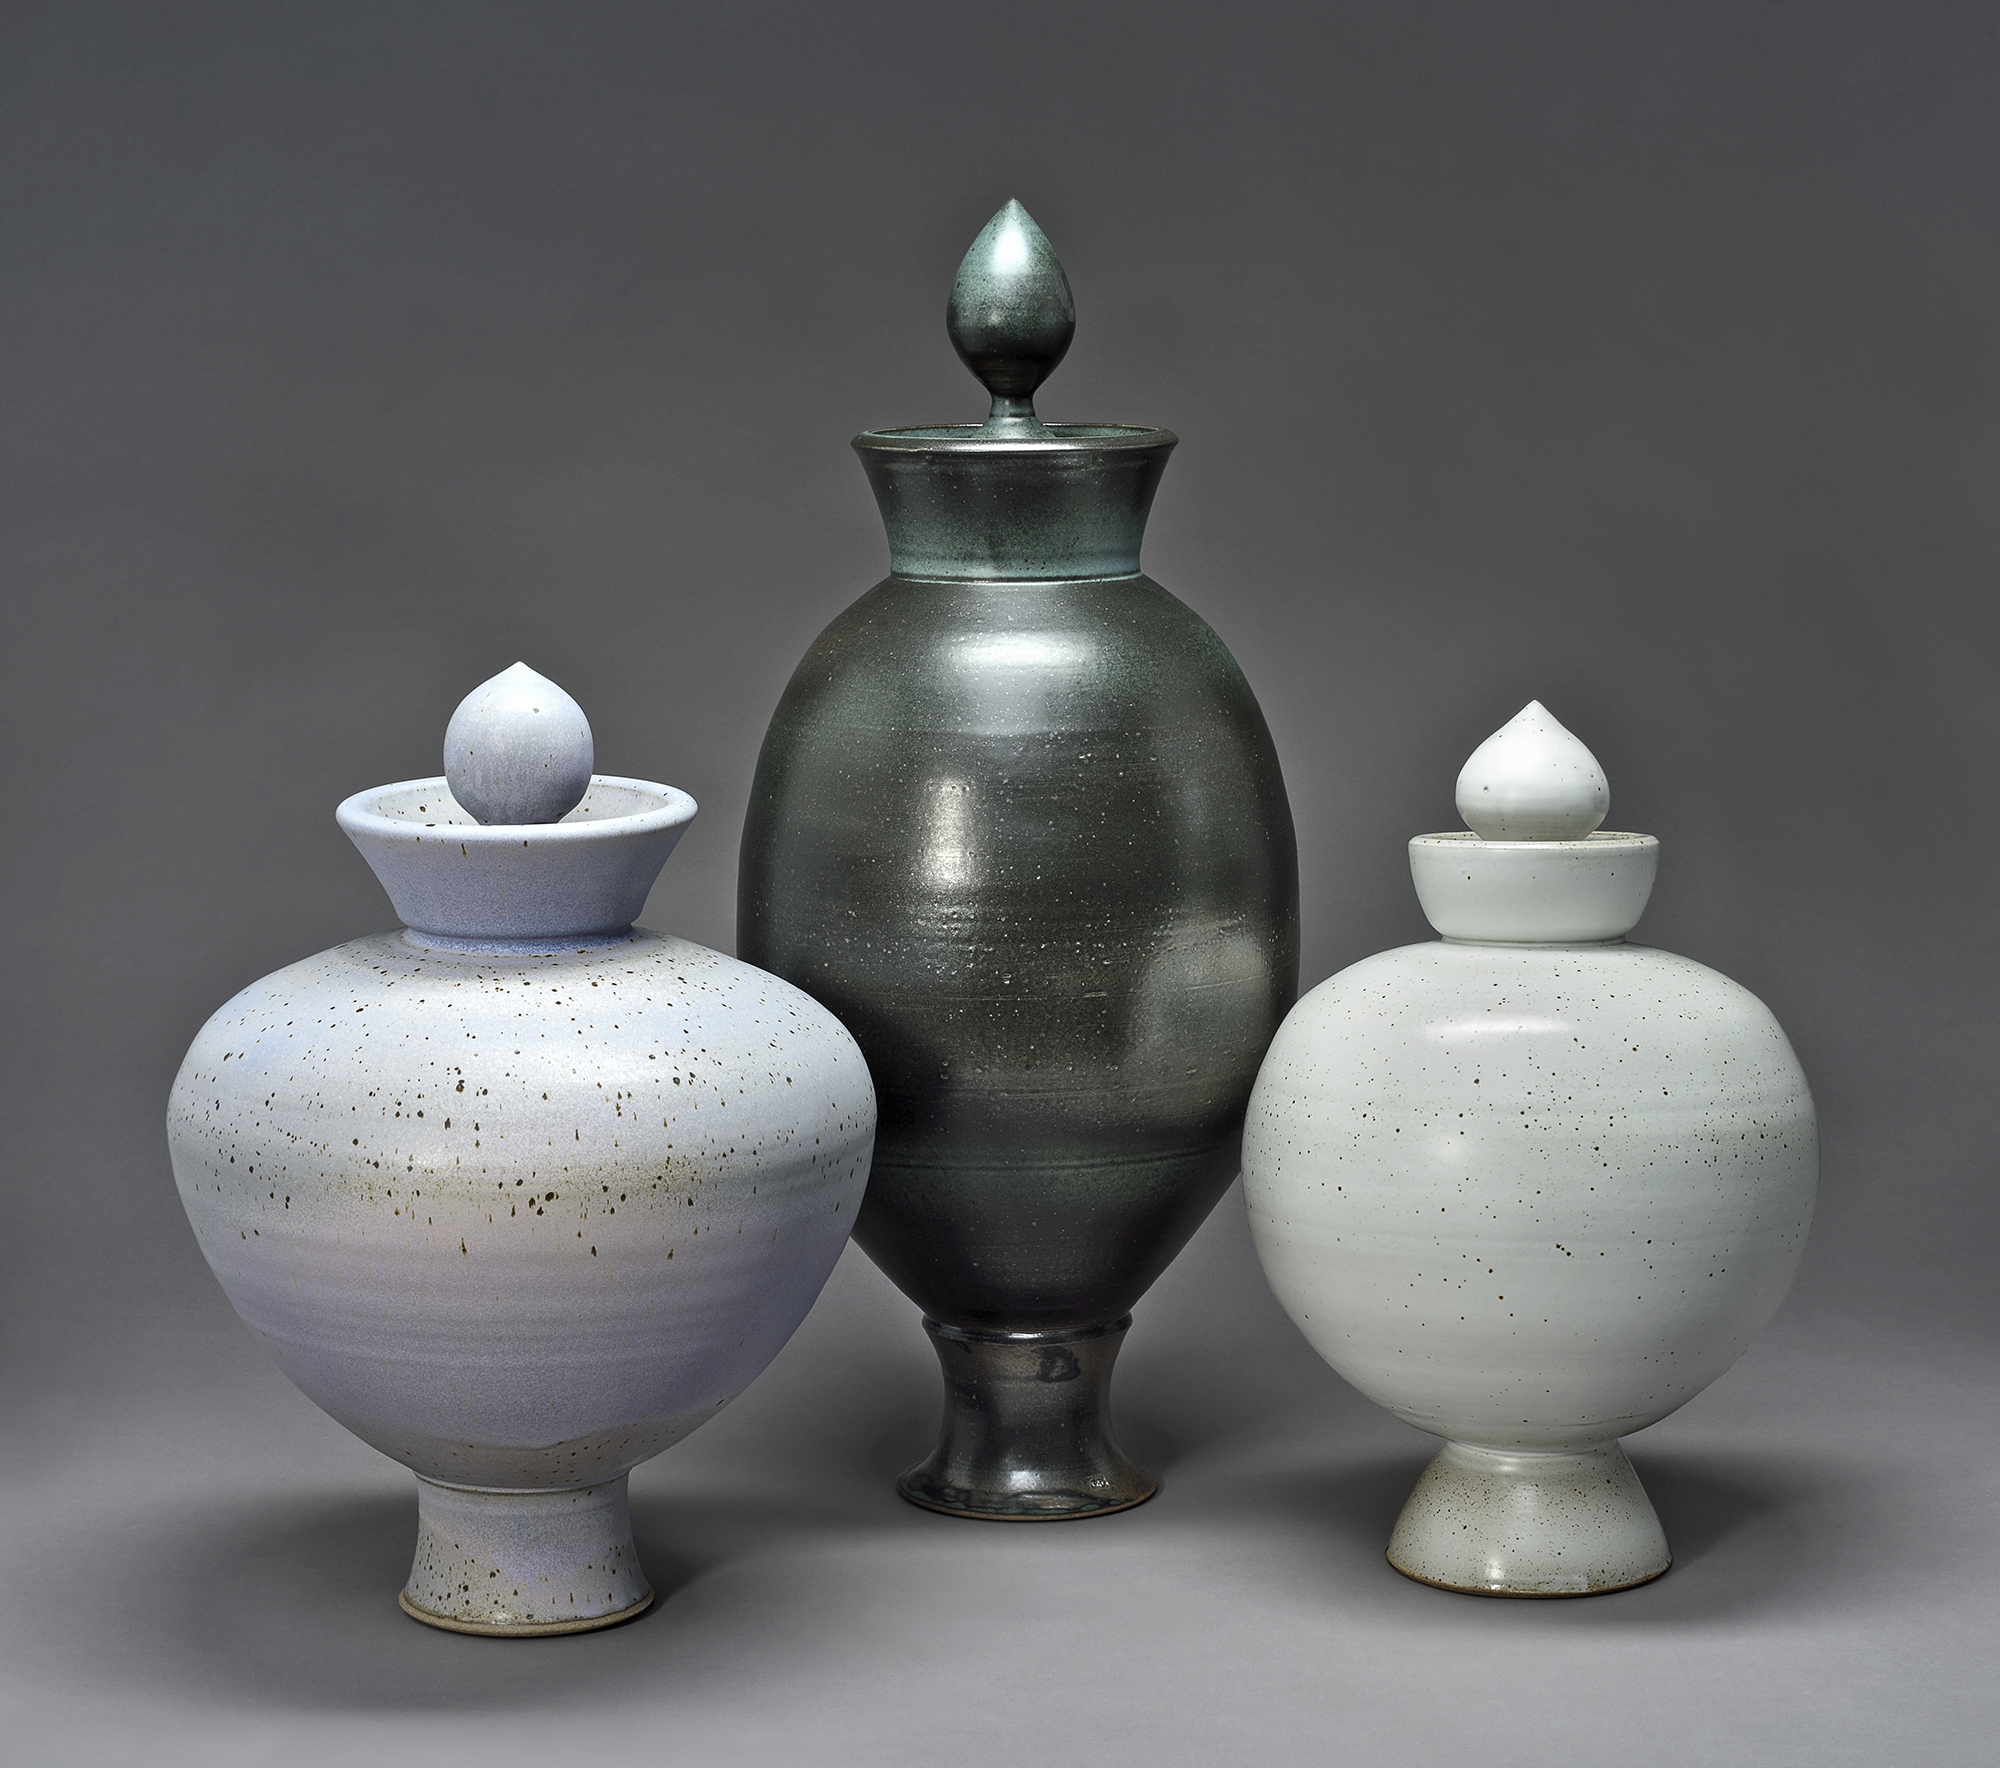 Three large ceramic vessels, side by side.